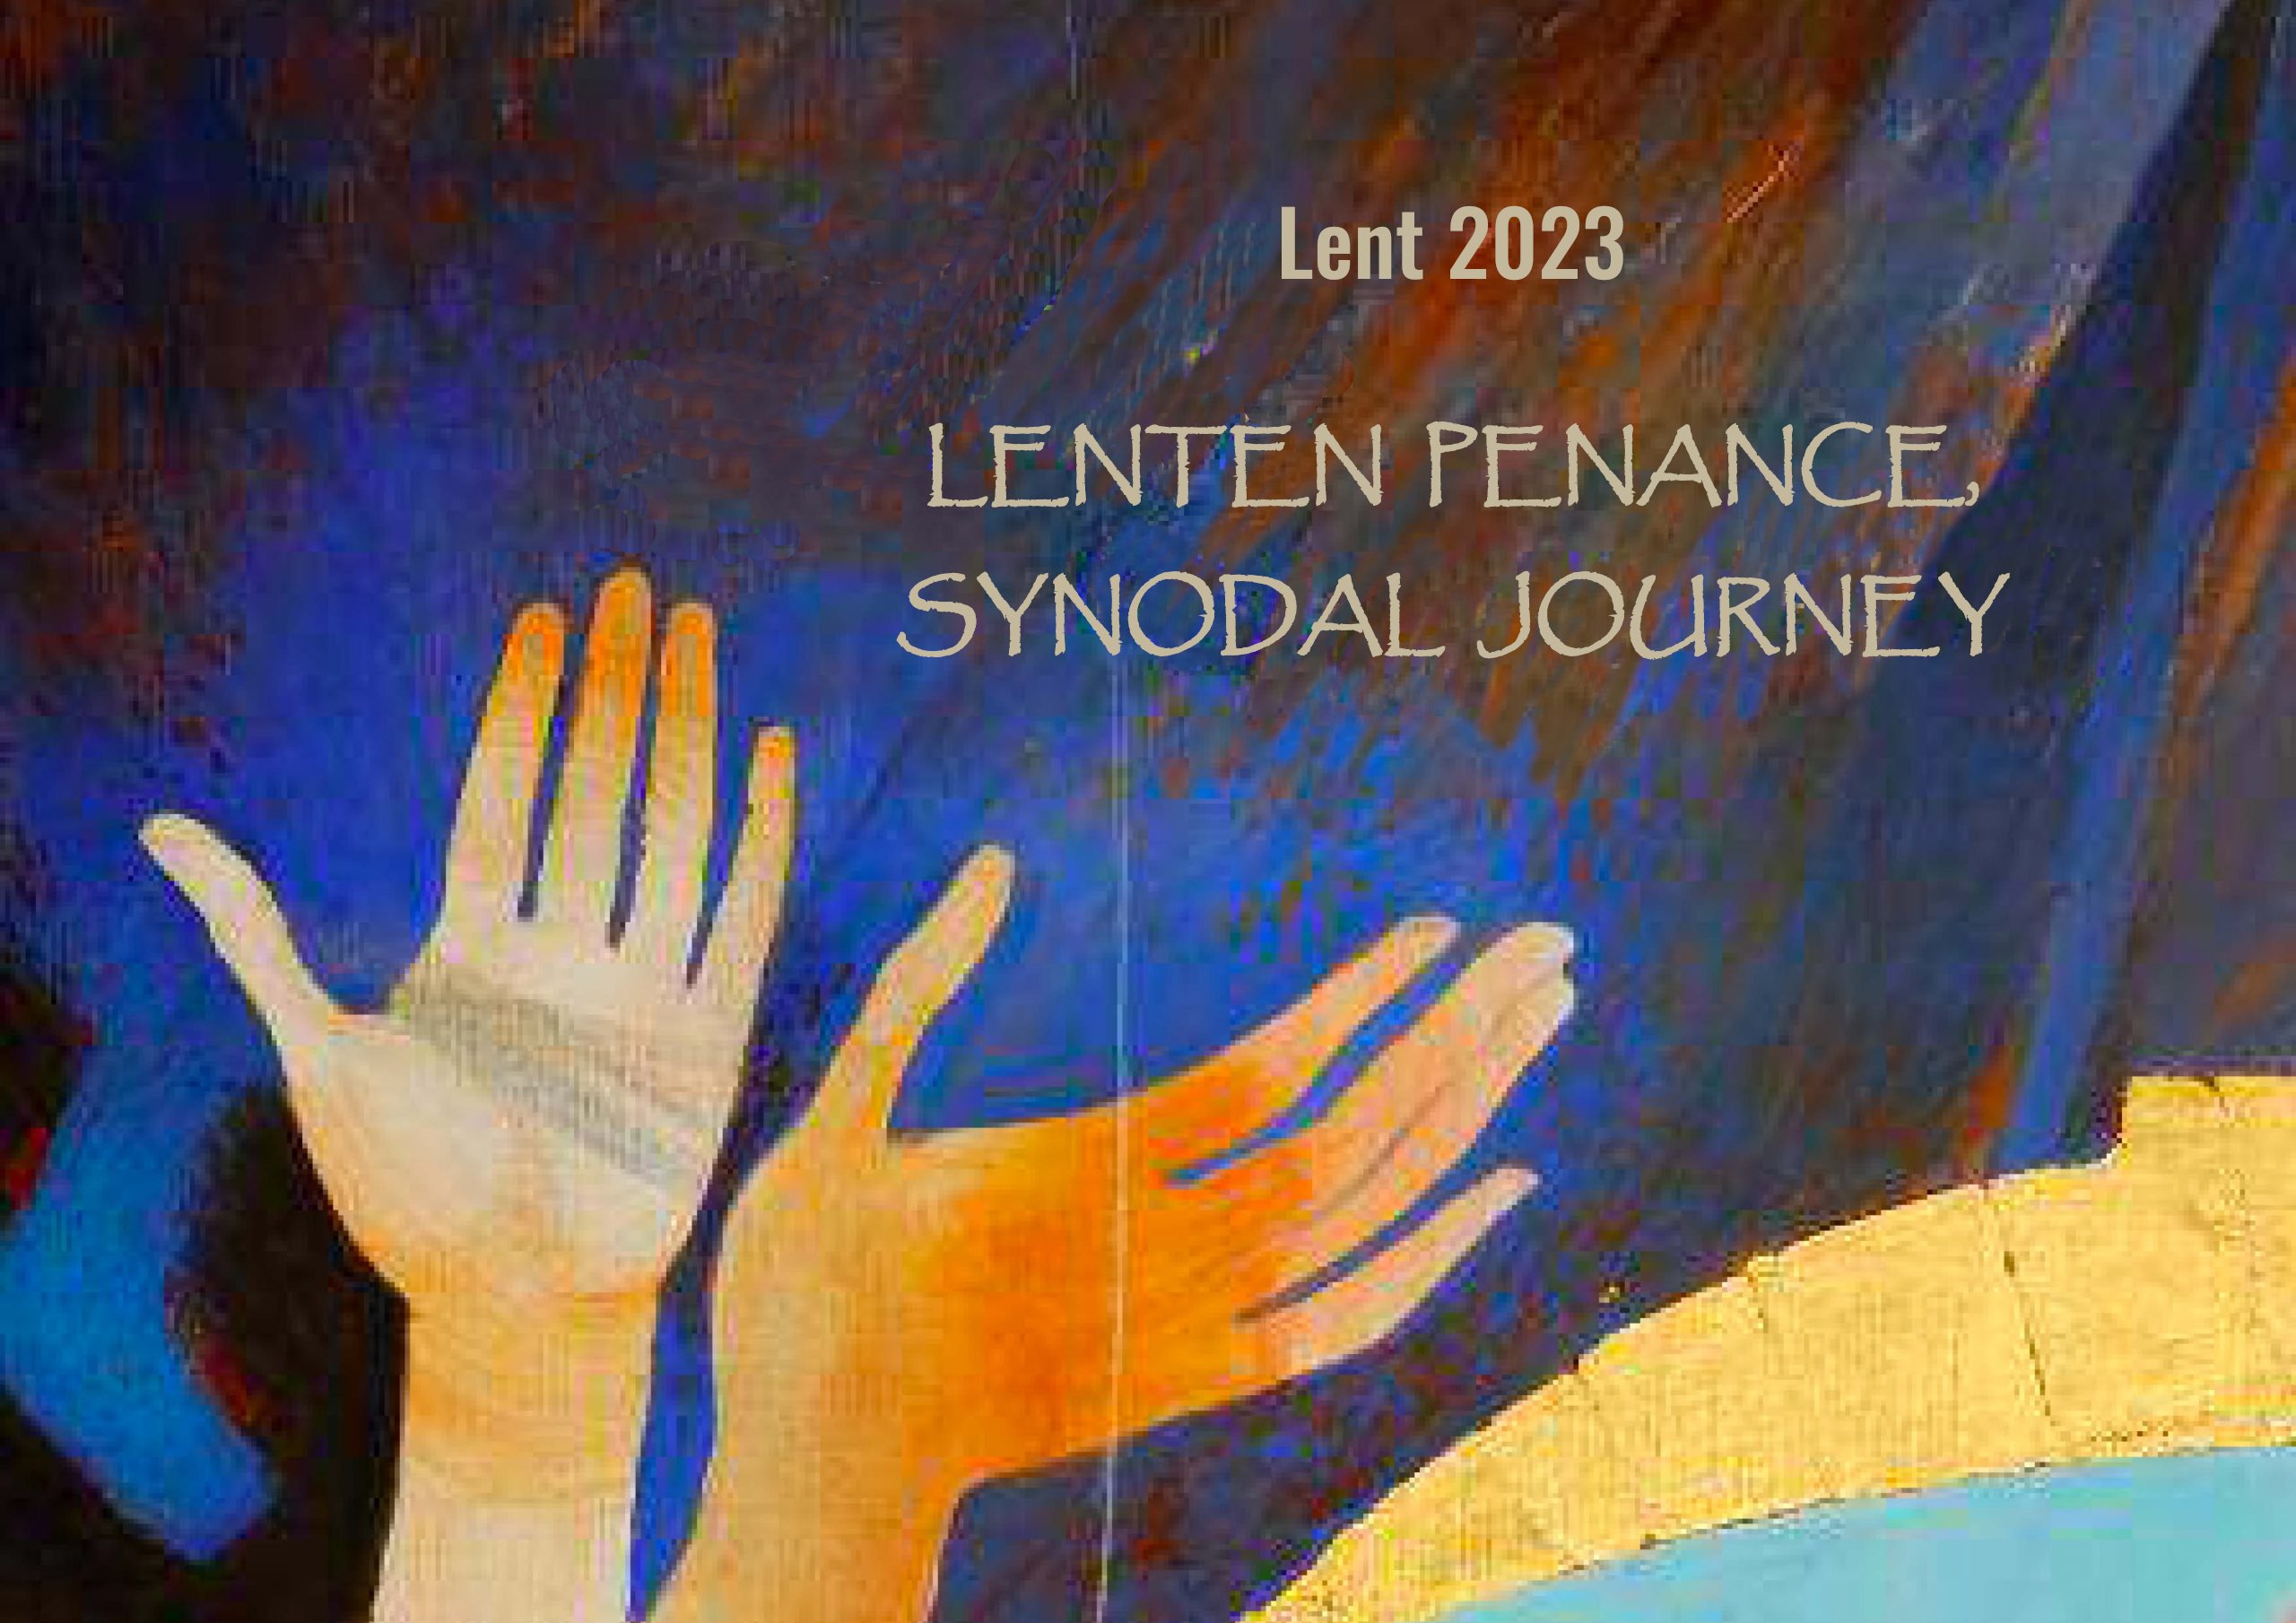 Lenten Penance and the Synodal Journey